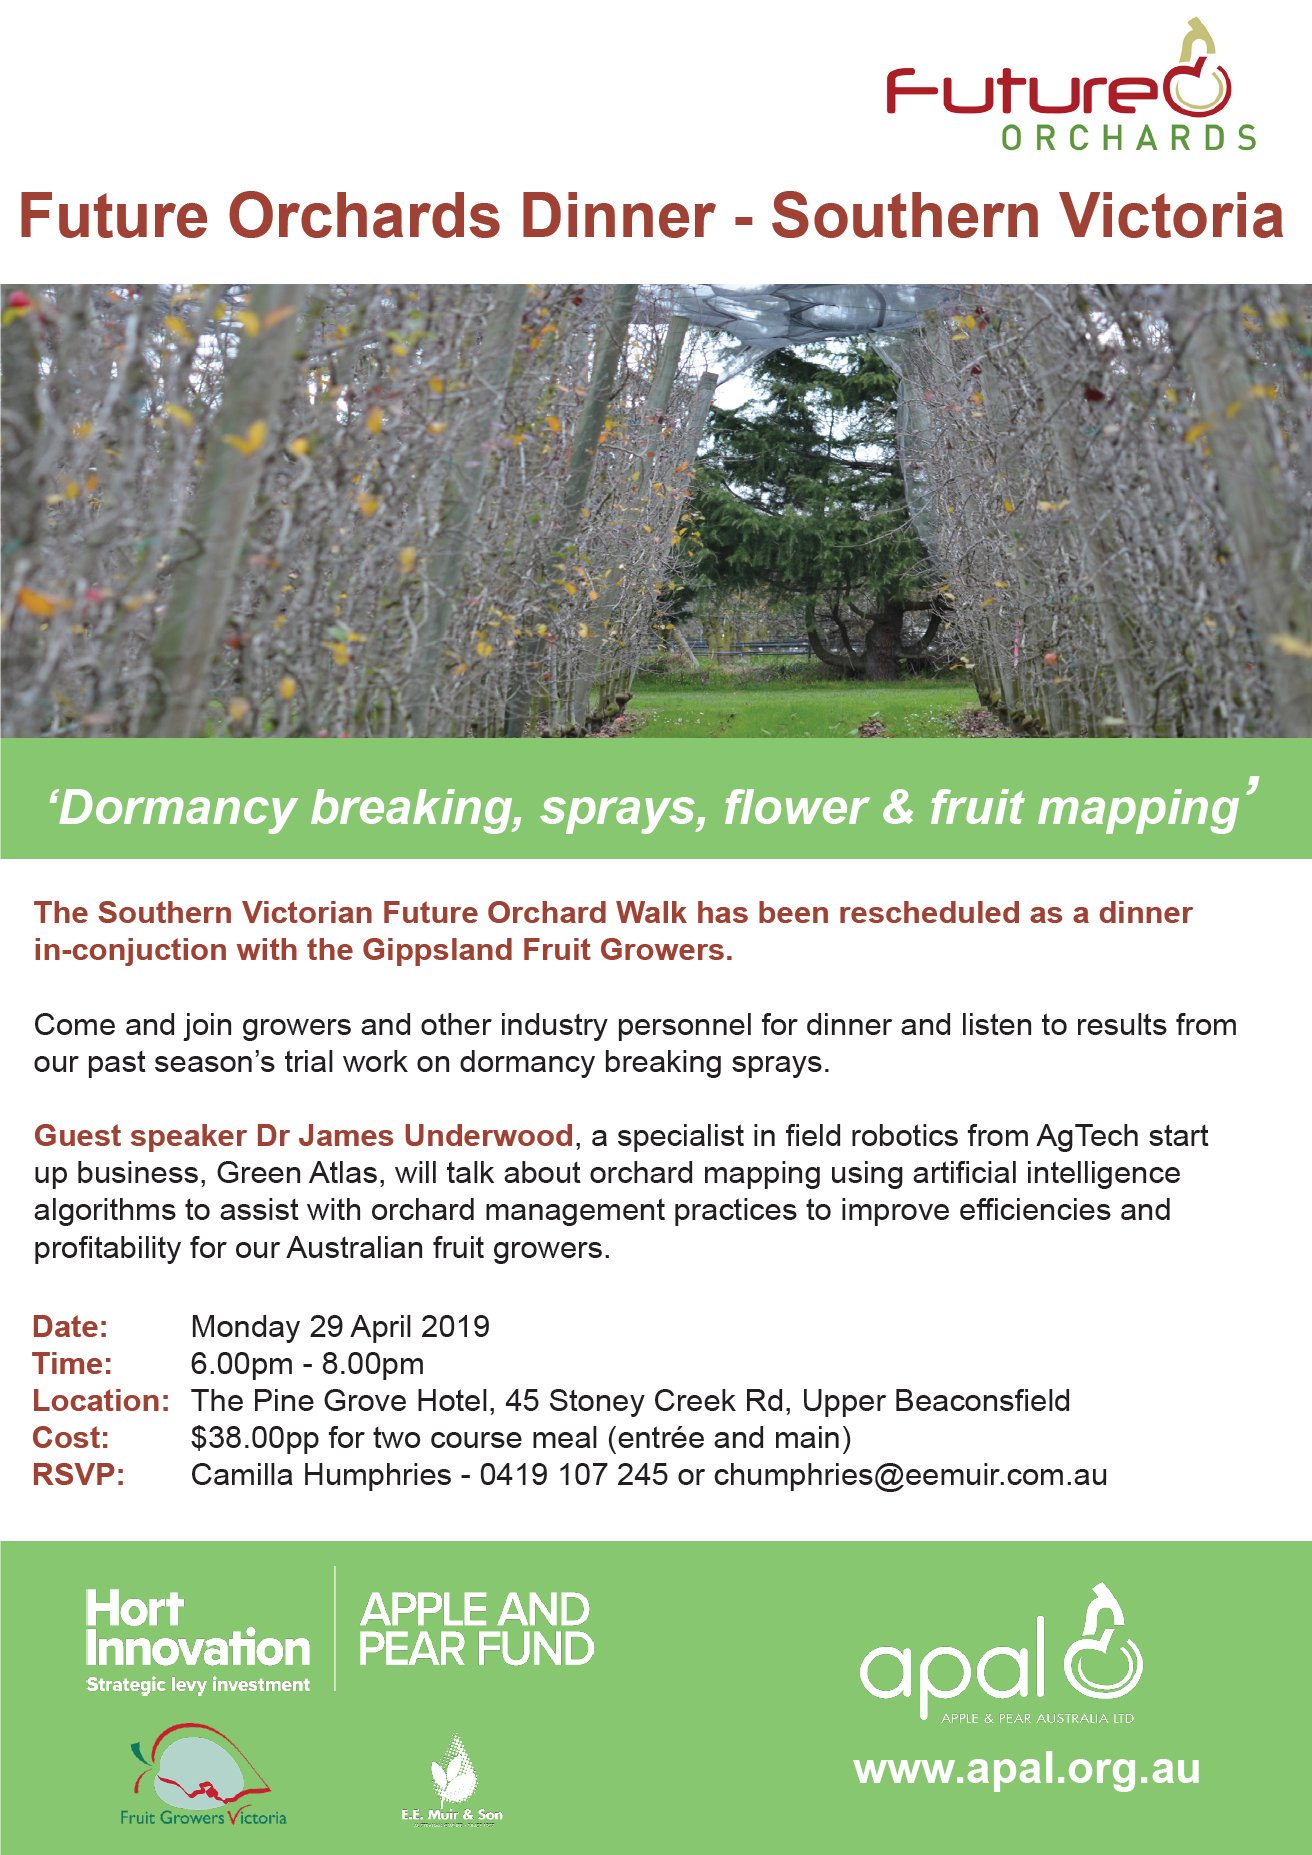 Southern Victoria Future Orchard Dinner April 2019 flyer